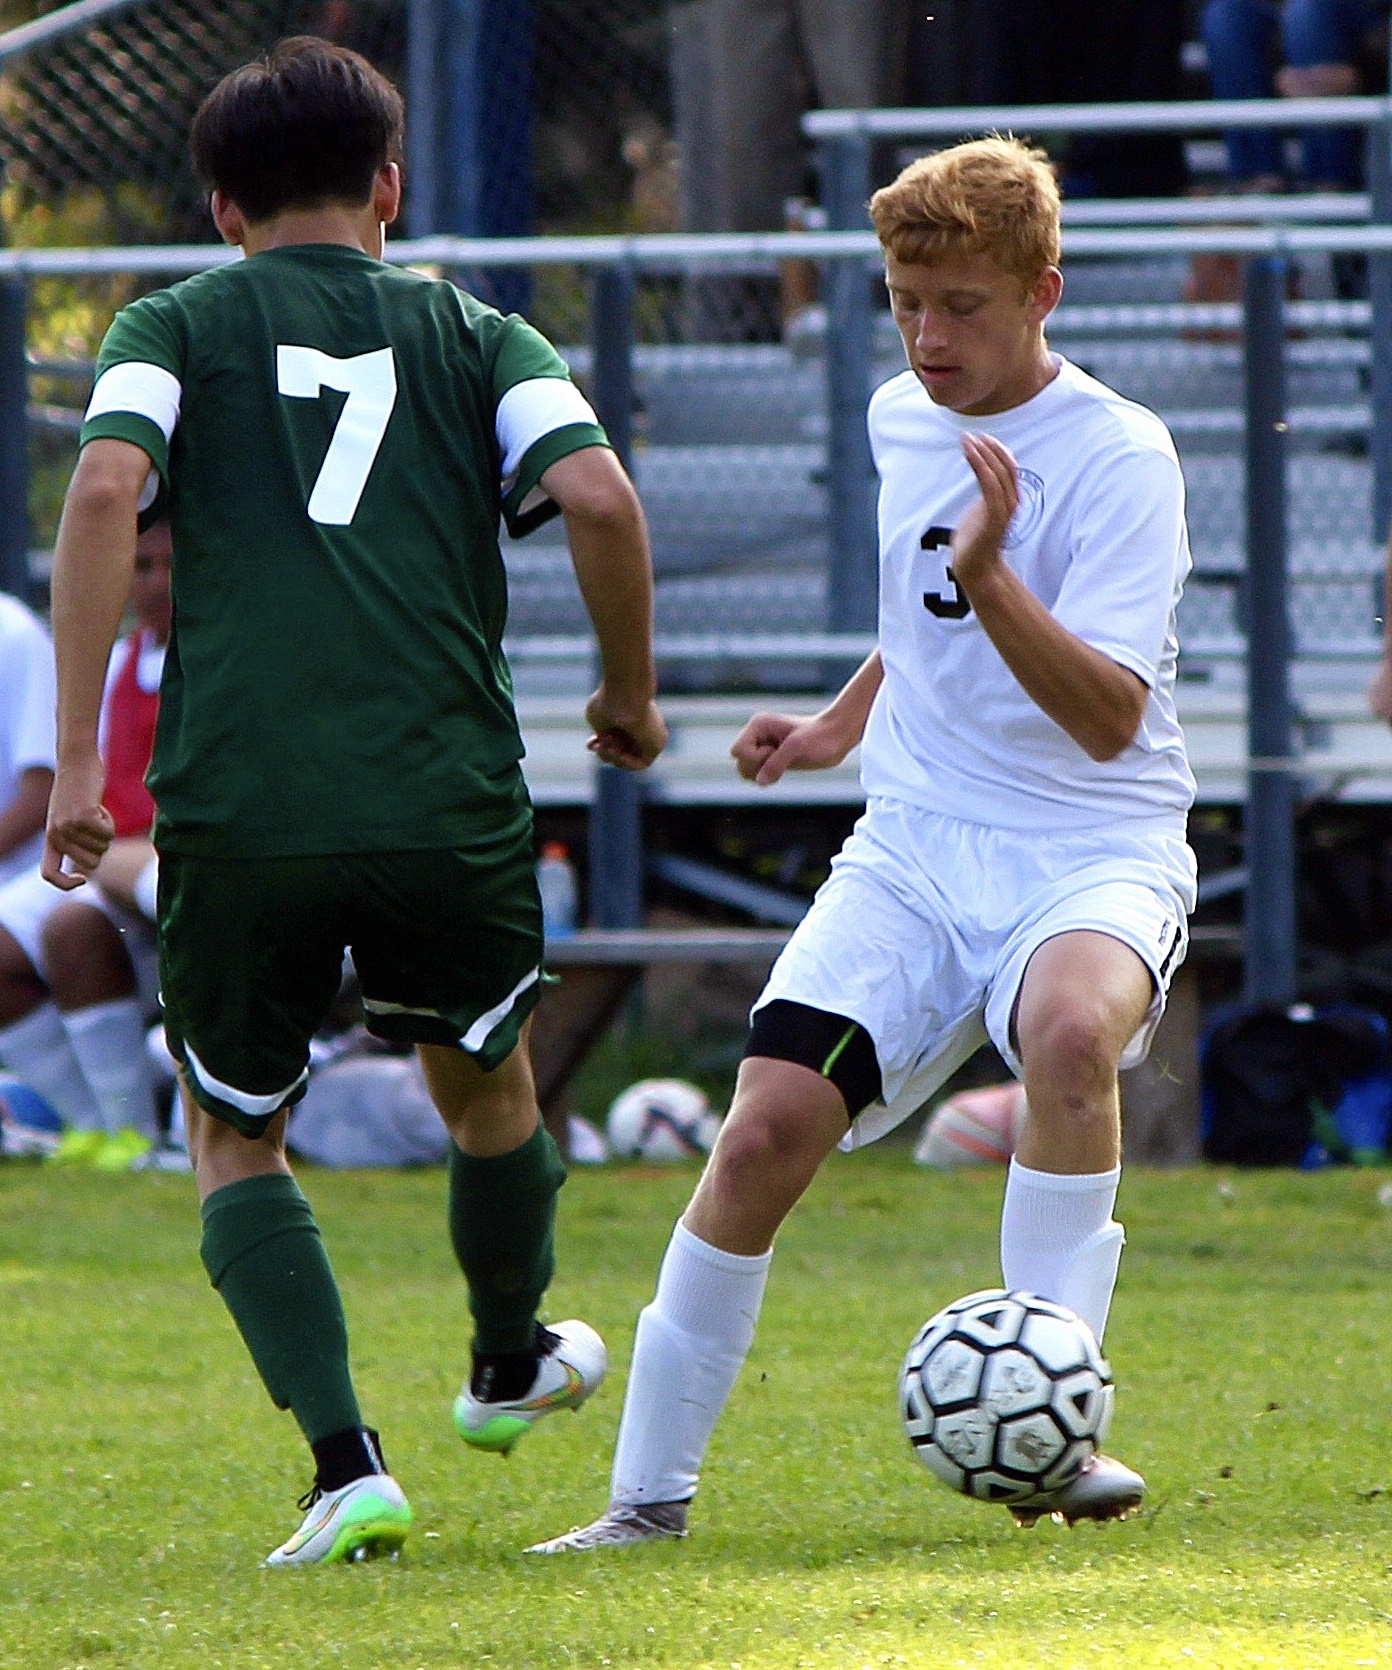 Corey Wiscomb photoAbove: Viking Ethan White (#3) during the game against Cedar Park and Shoreline Christian.